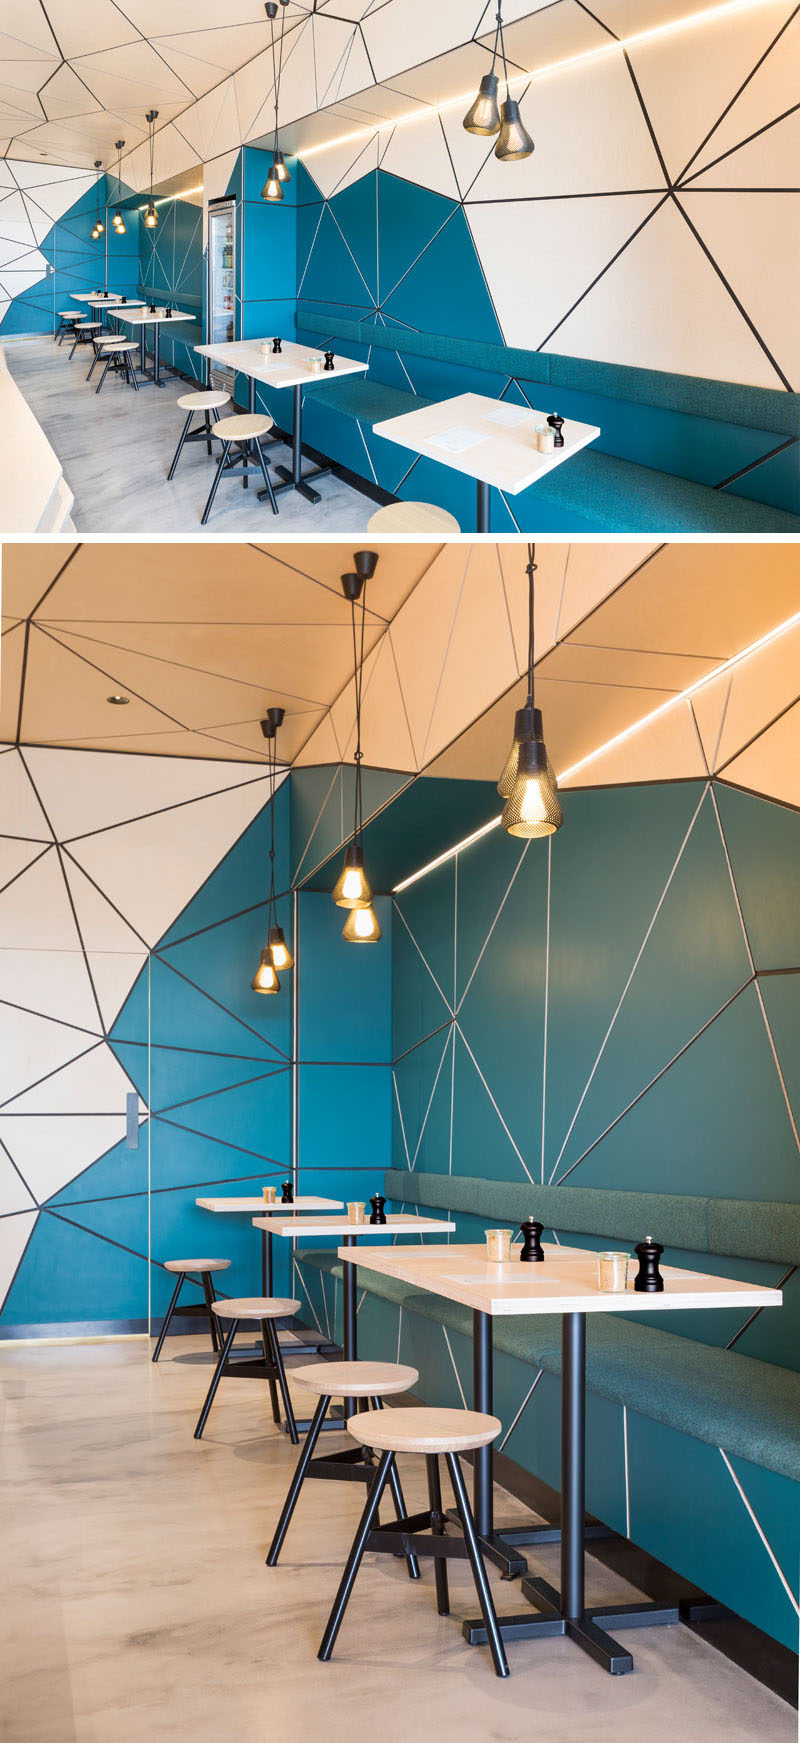 In this modern cafe, pale lime-washed birch panels have been paired with a rich teal color to accentuate the geometric patterns.